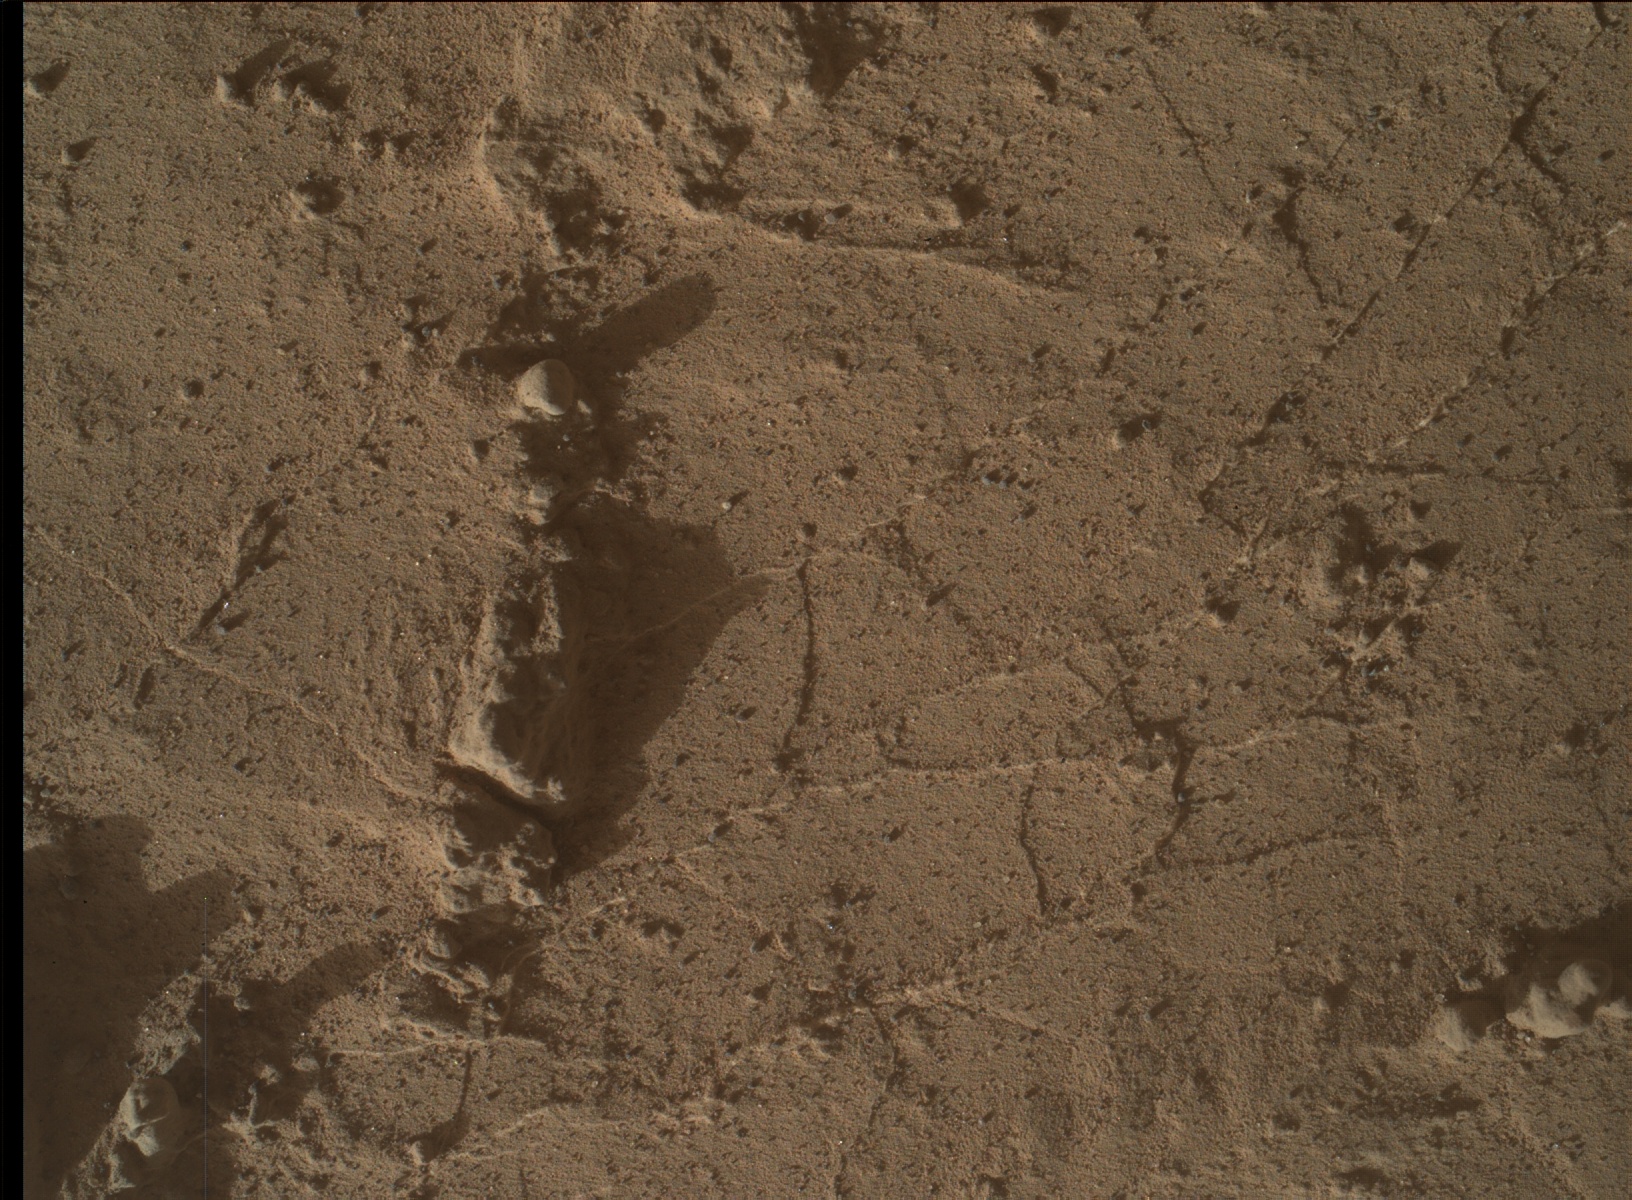 Nasa's Mars rover Curiosity acquired this image using its Mars Hand Lens Imager (MAHLI) on Sol 3139